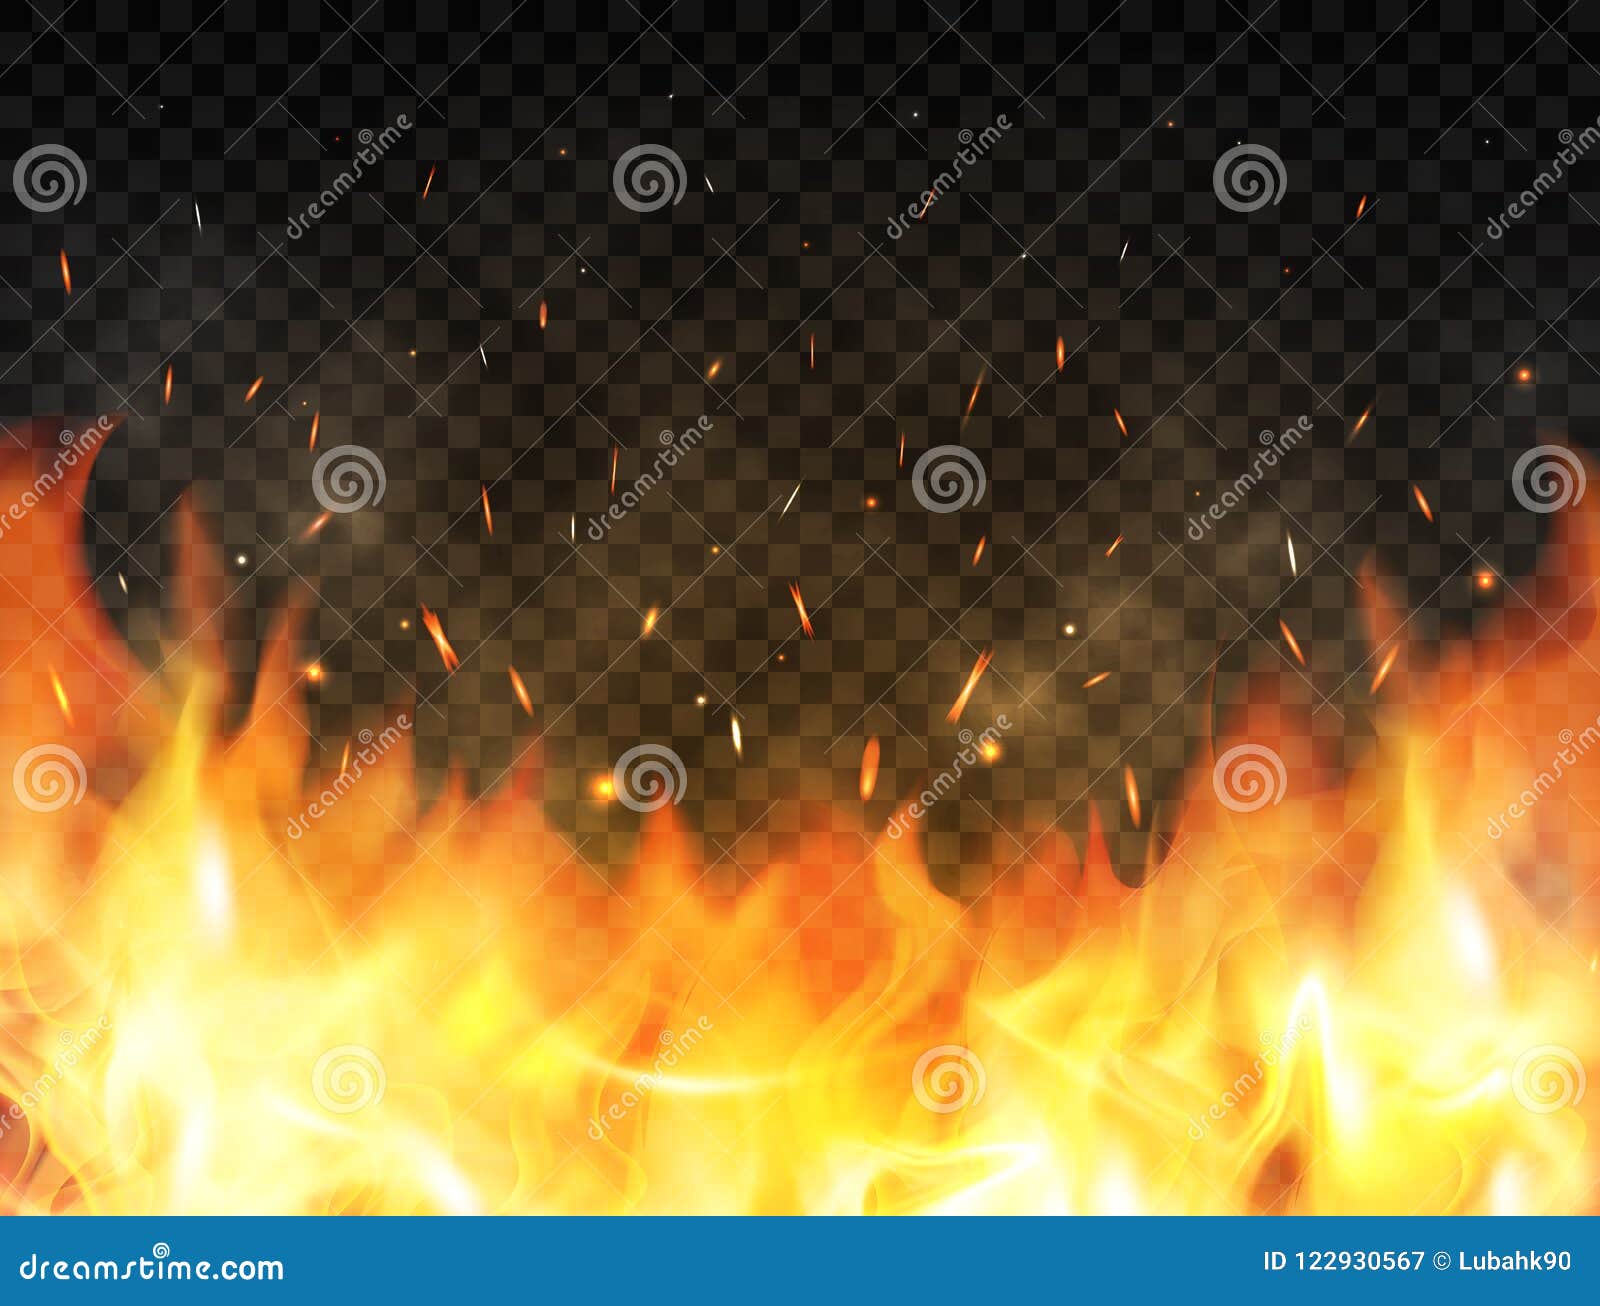 Realistic Flames On Transparent Background Fire Background With Flames Red Fire Sparks Flying Up Glowing Particles Stock Vector Illustration Of Background Burn 122930567